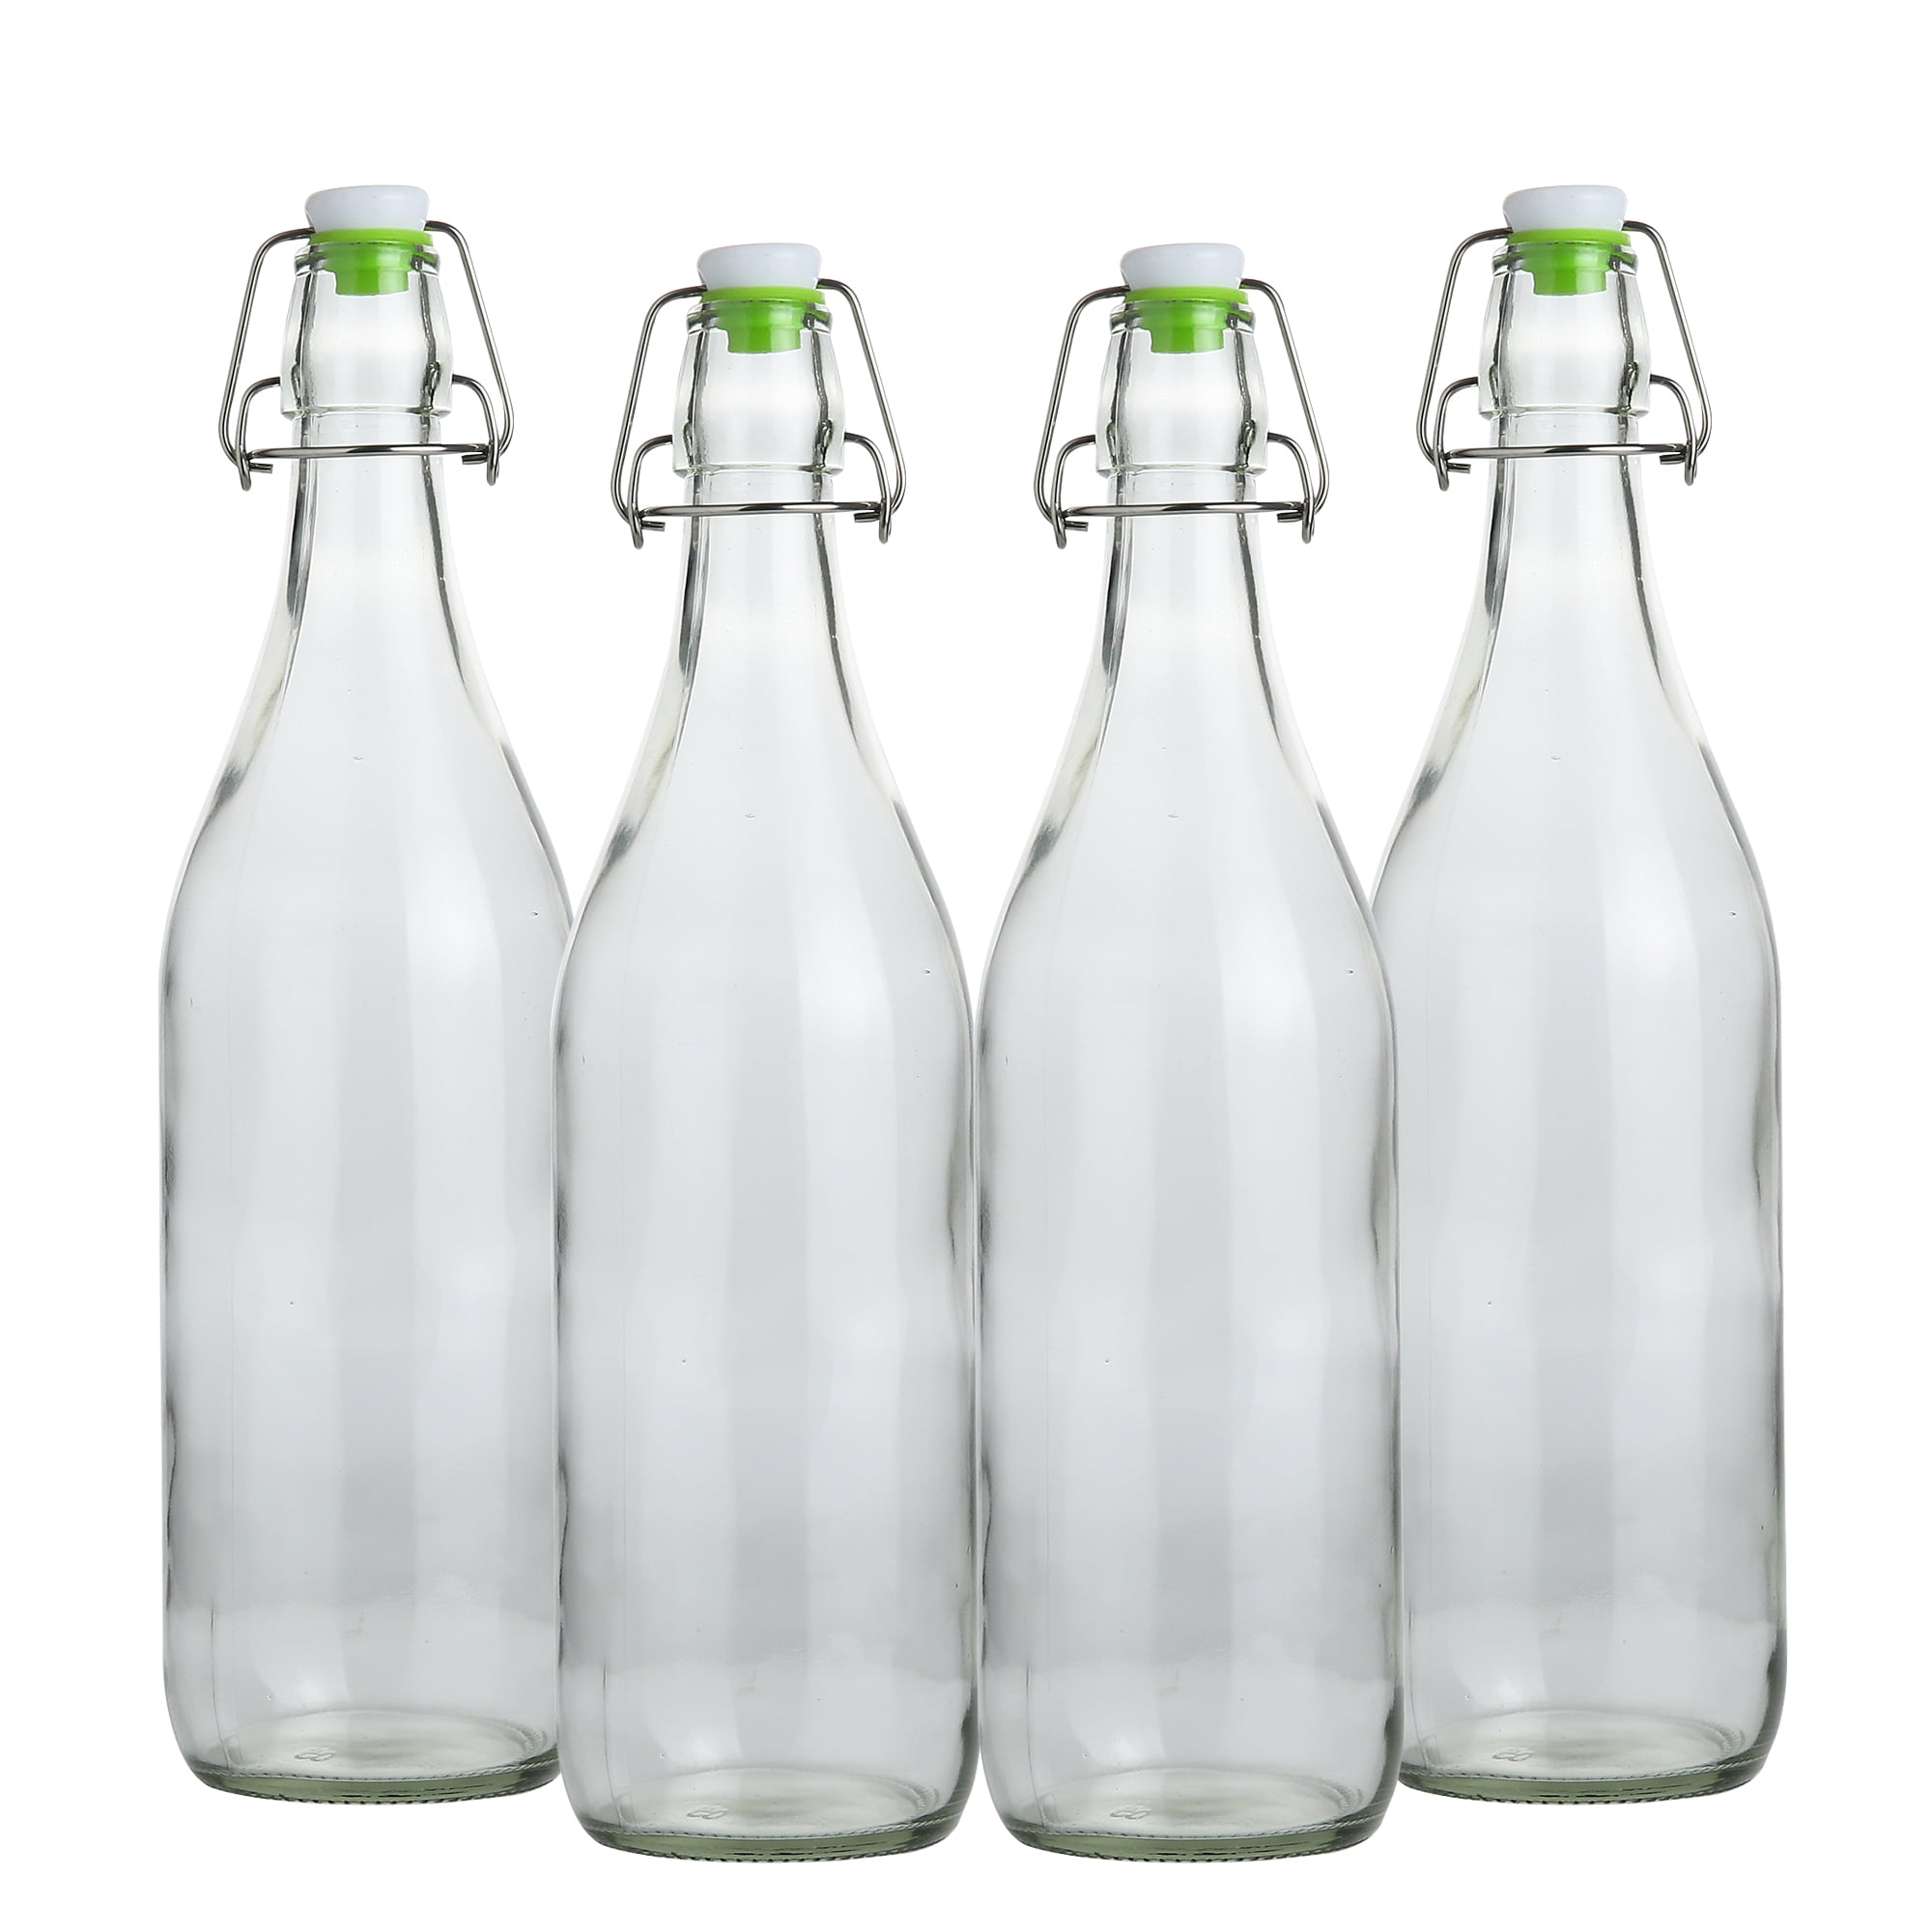 4 x Bottles 2l Glass With Handle Swing Stopper  Home Brew Pack of 4 UK 